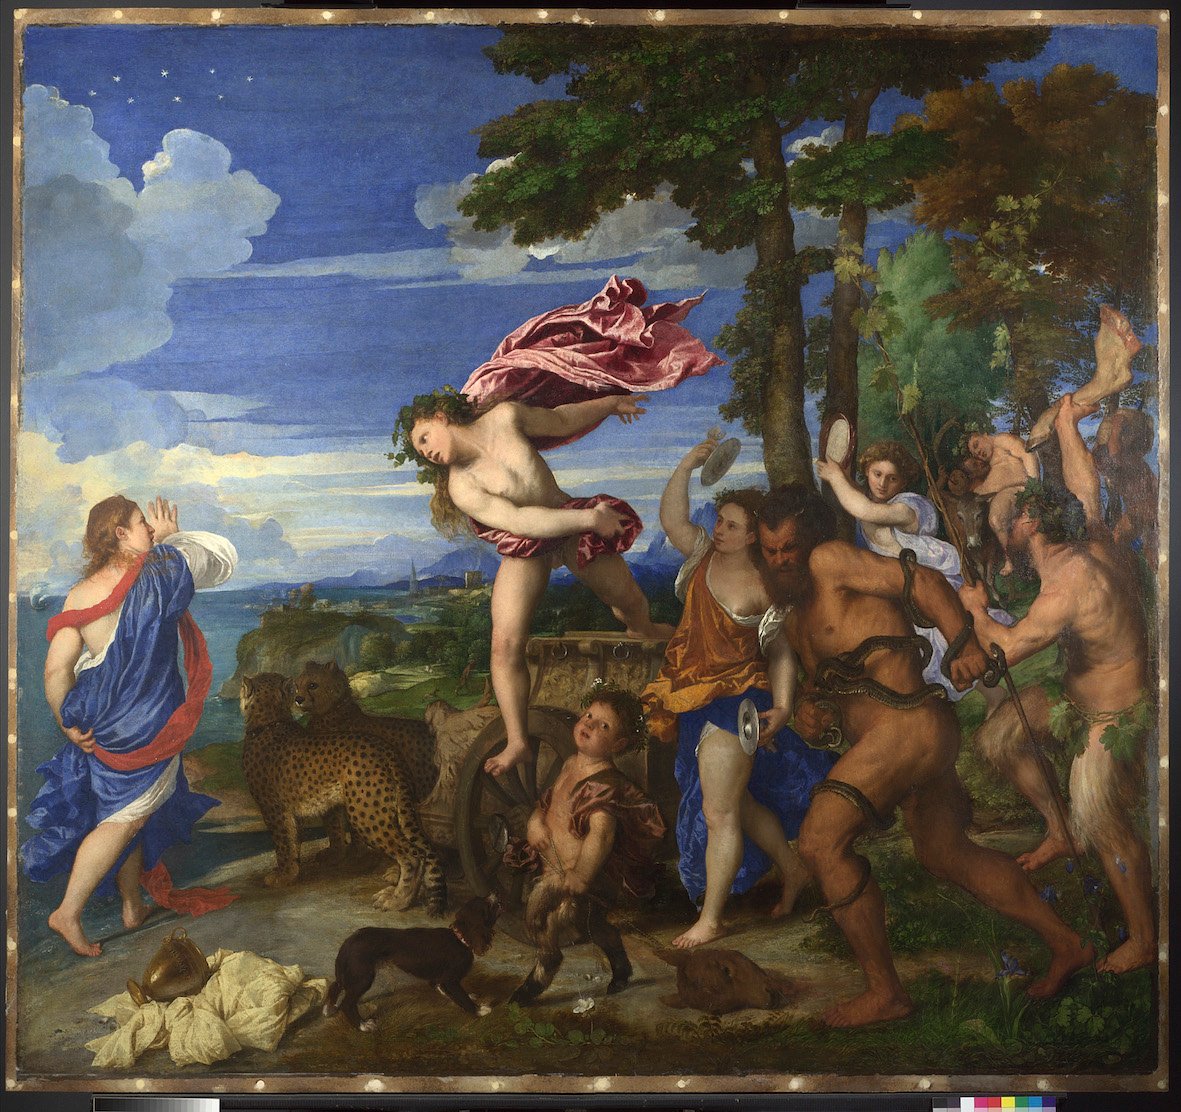 Titian, Bacchus and Ariadne, 1520-3 (c) National Gallery, London